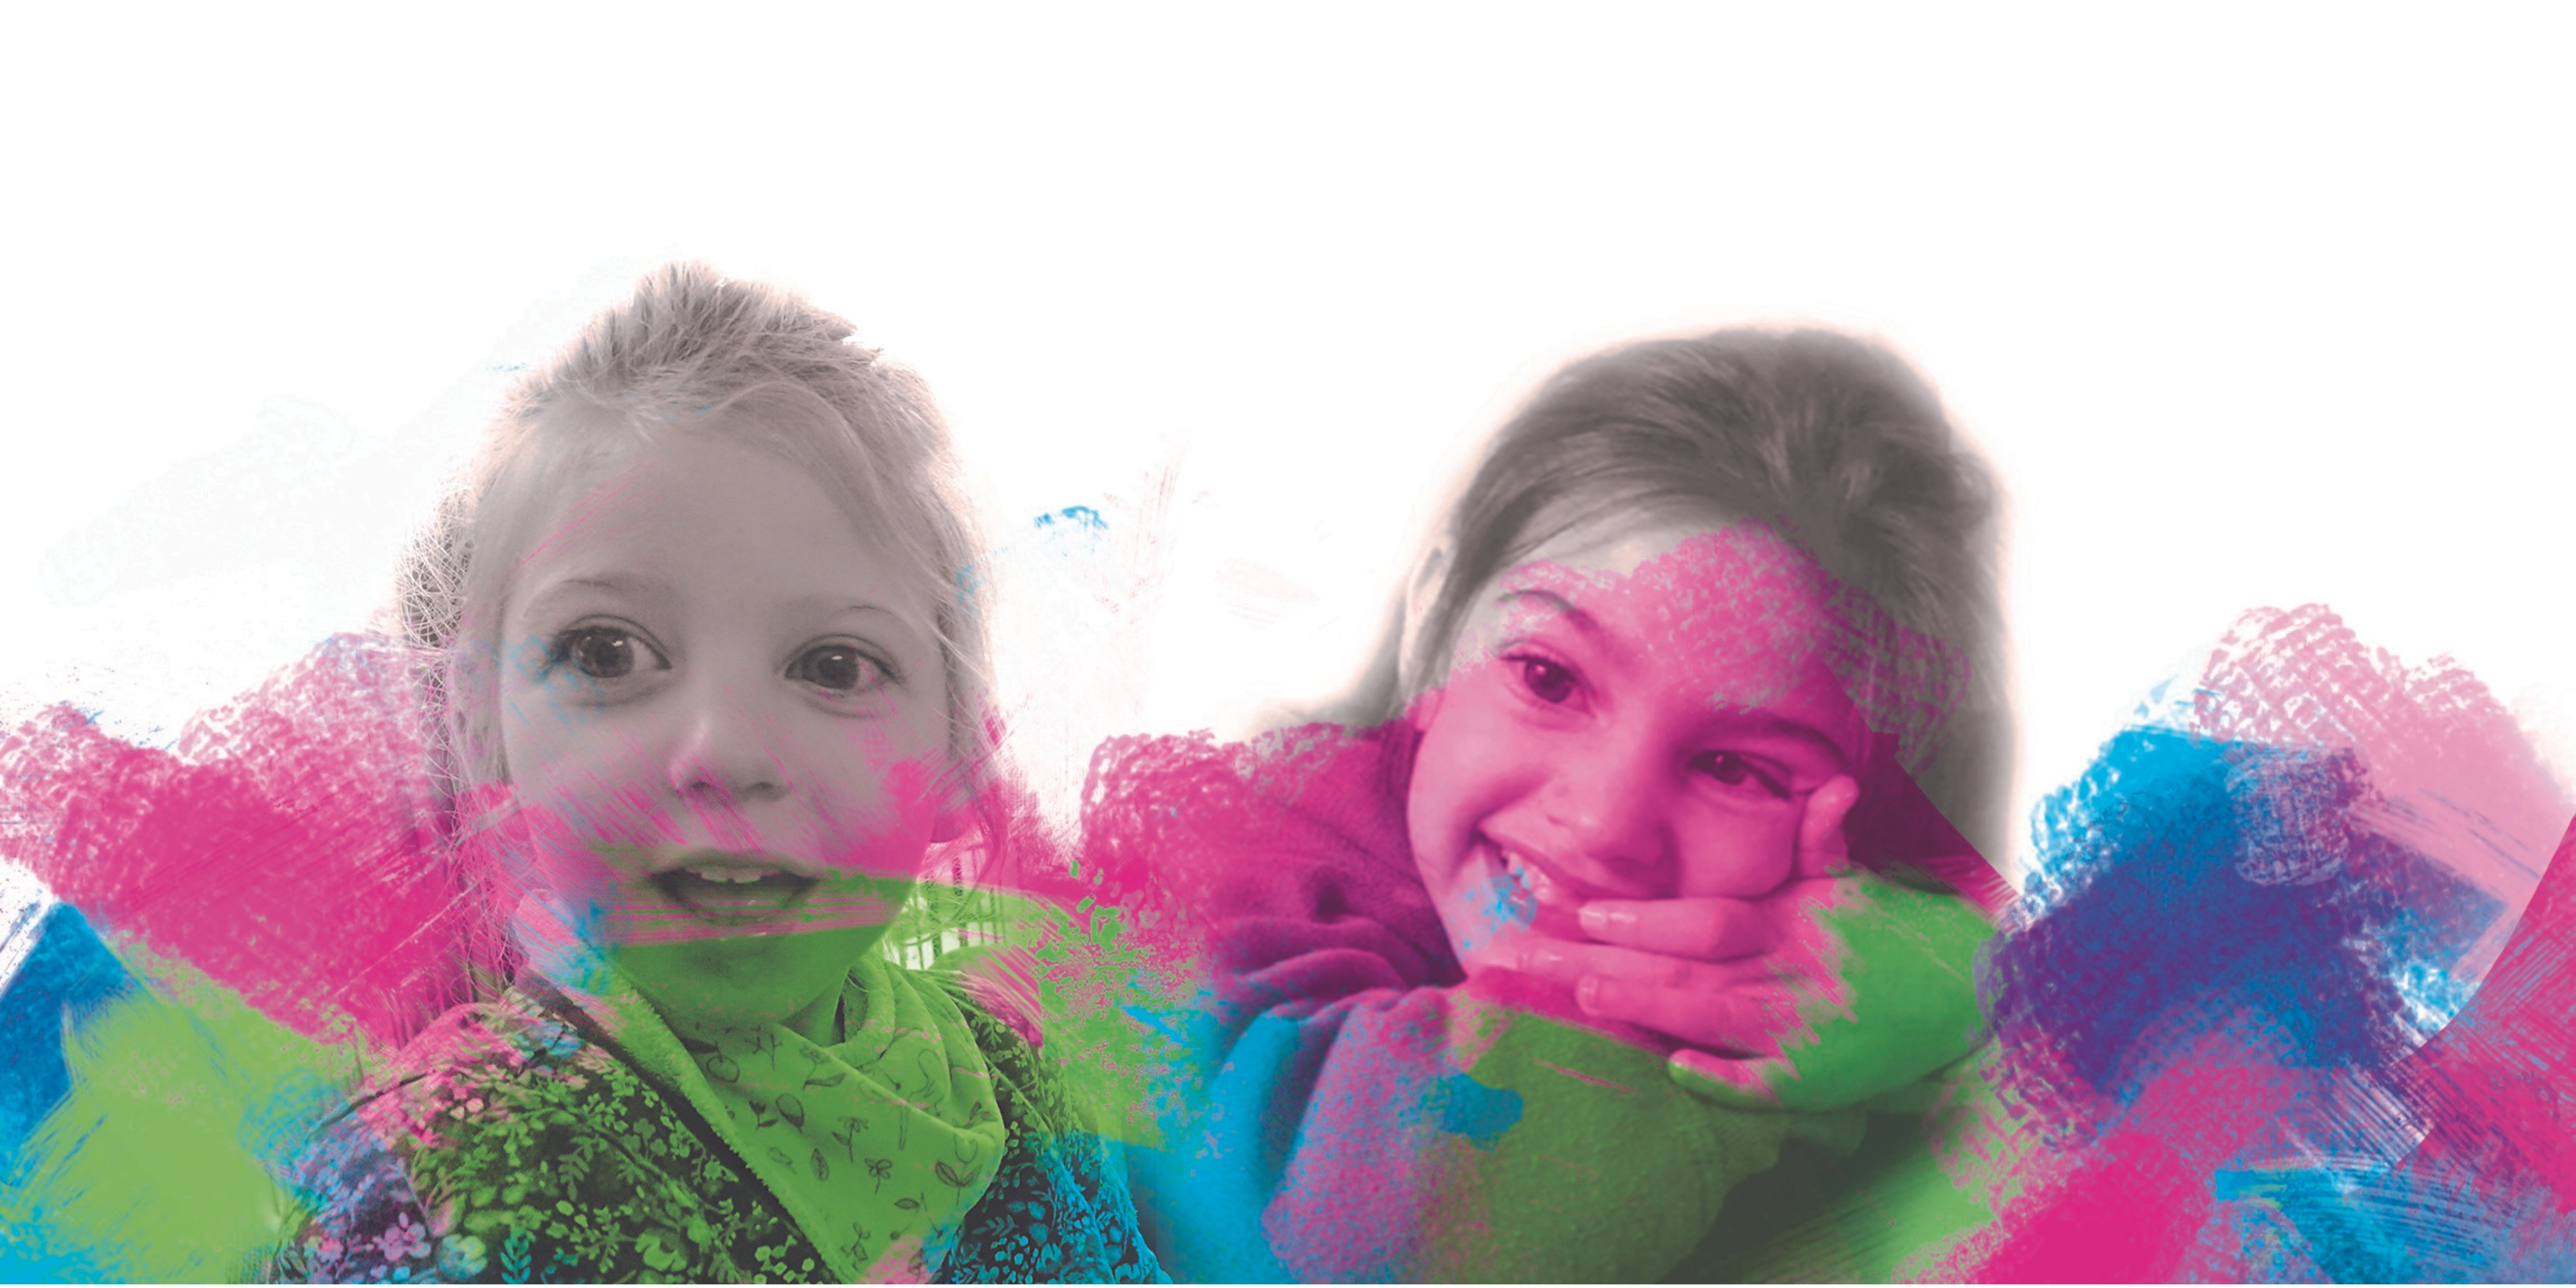 The top half of two beautiful young girls smiling overlaid with pink, green and blue brush strokes